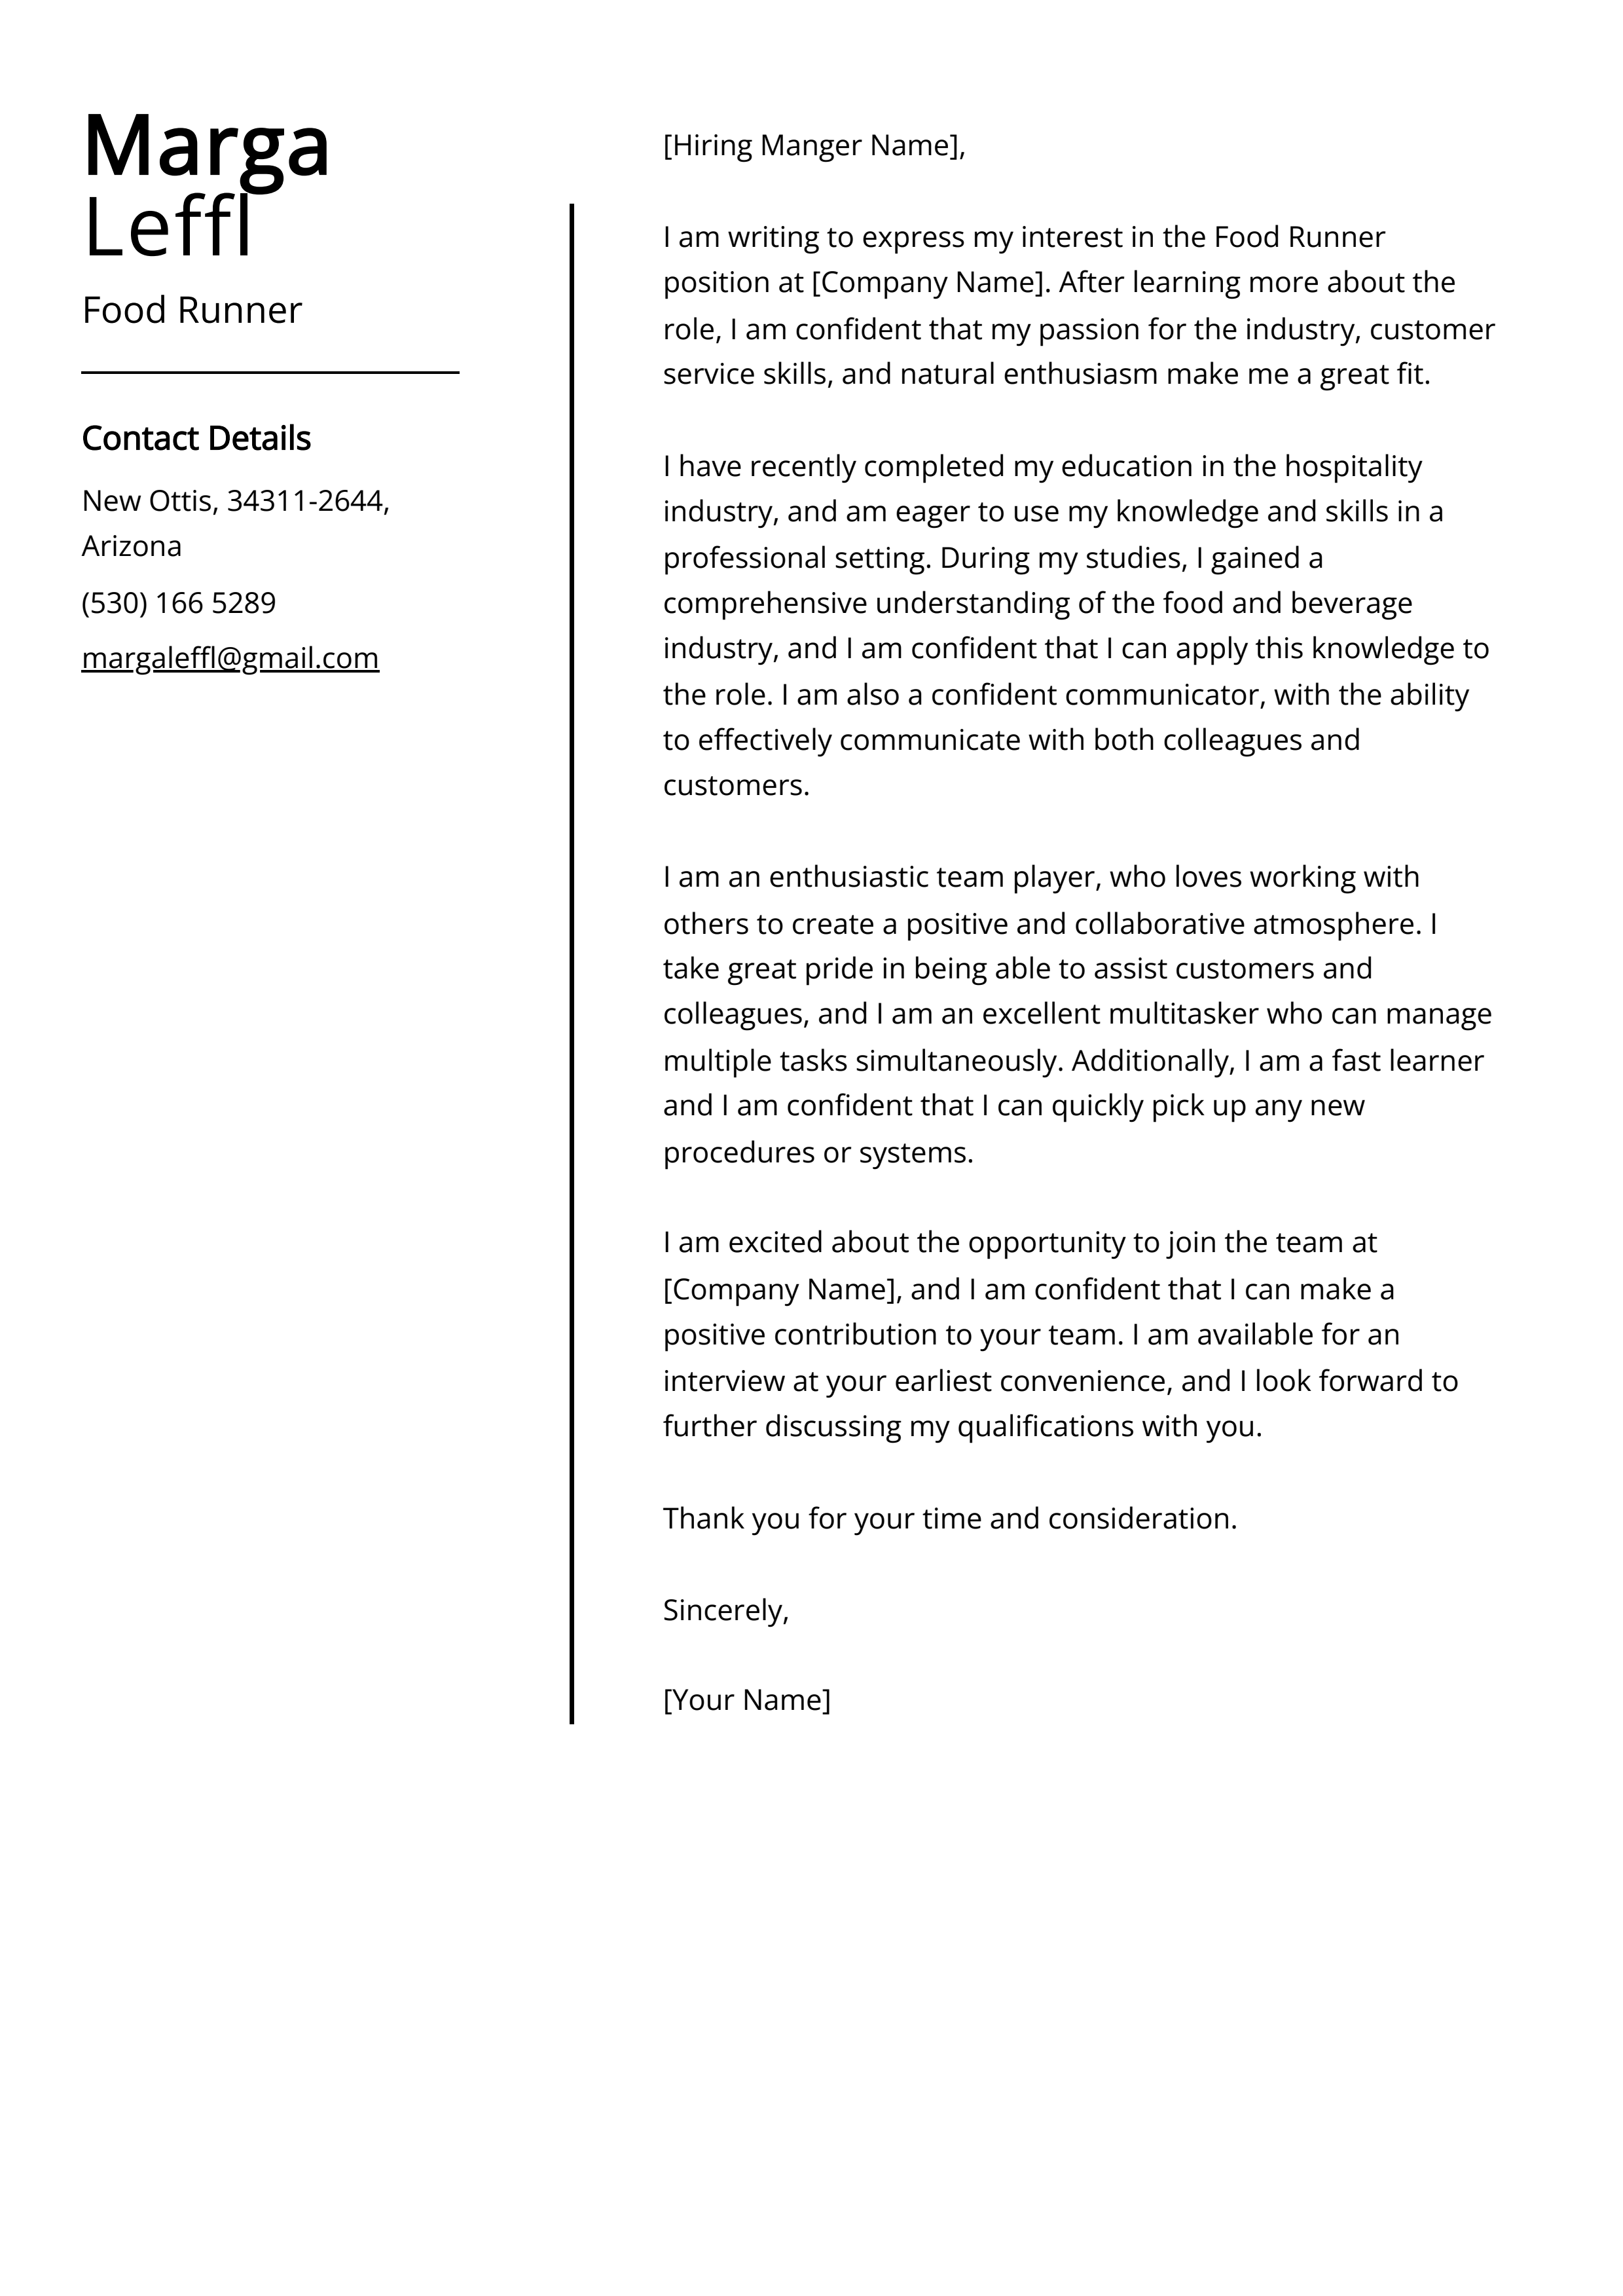 Food Runner Cover Letter Example